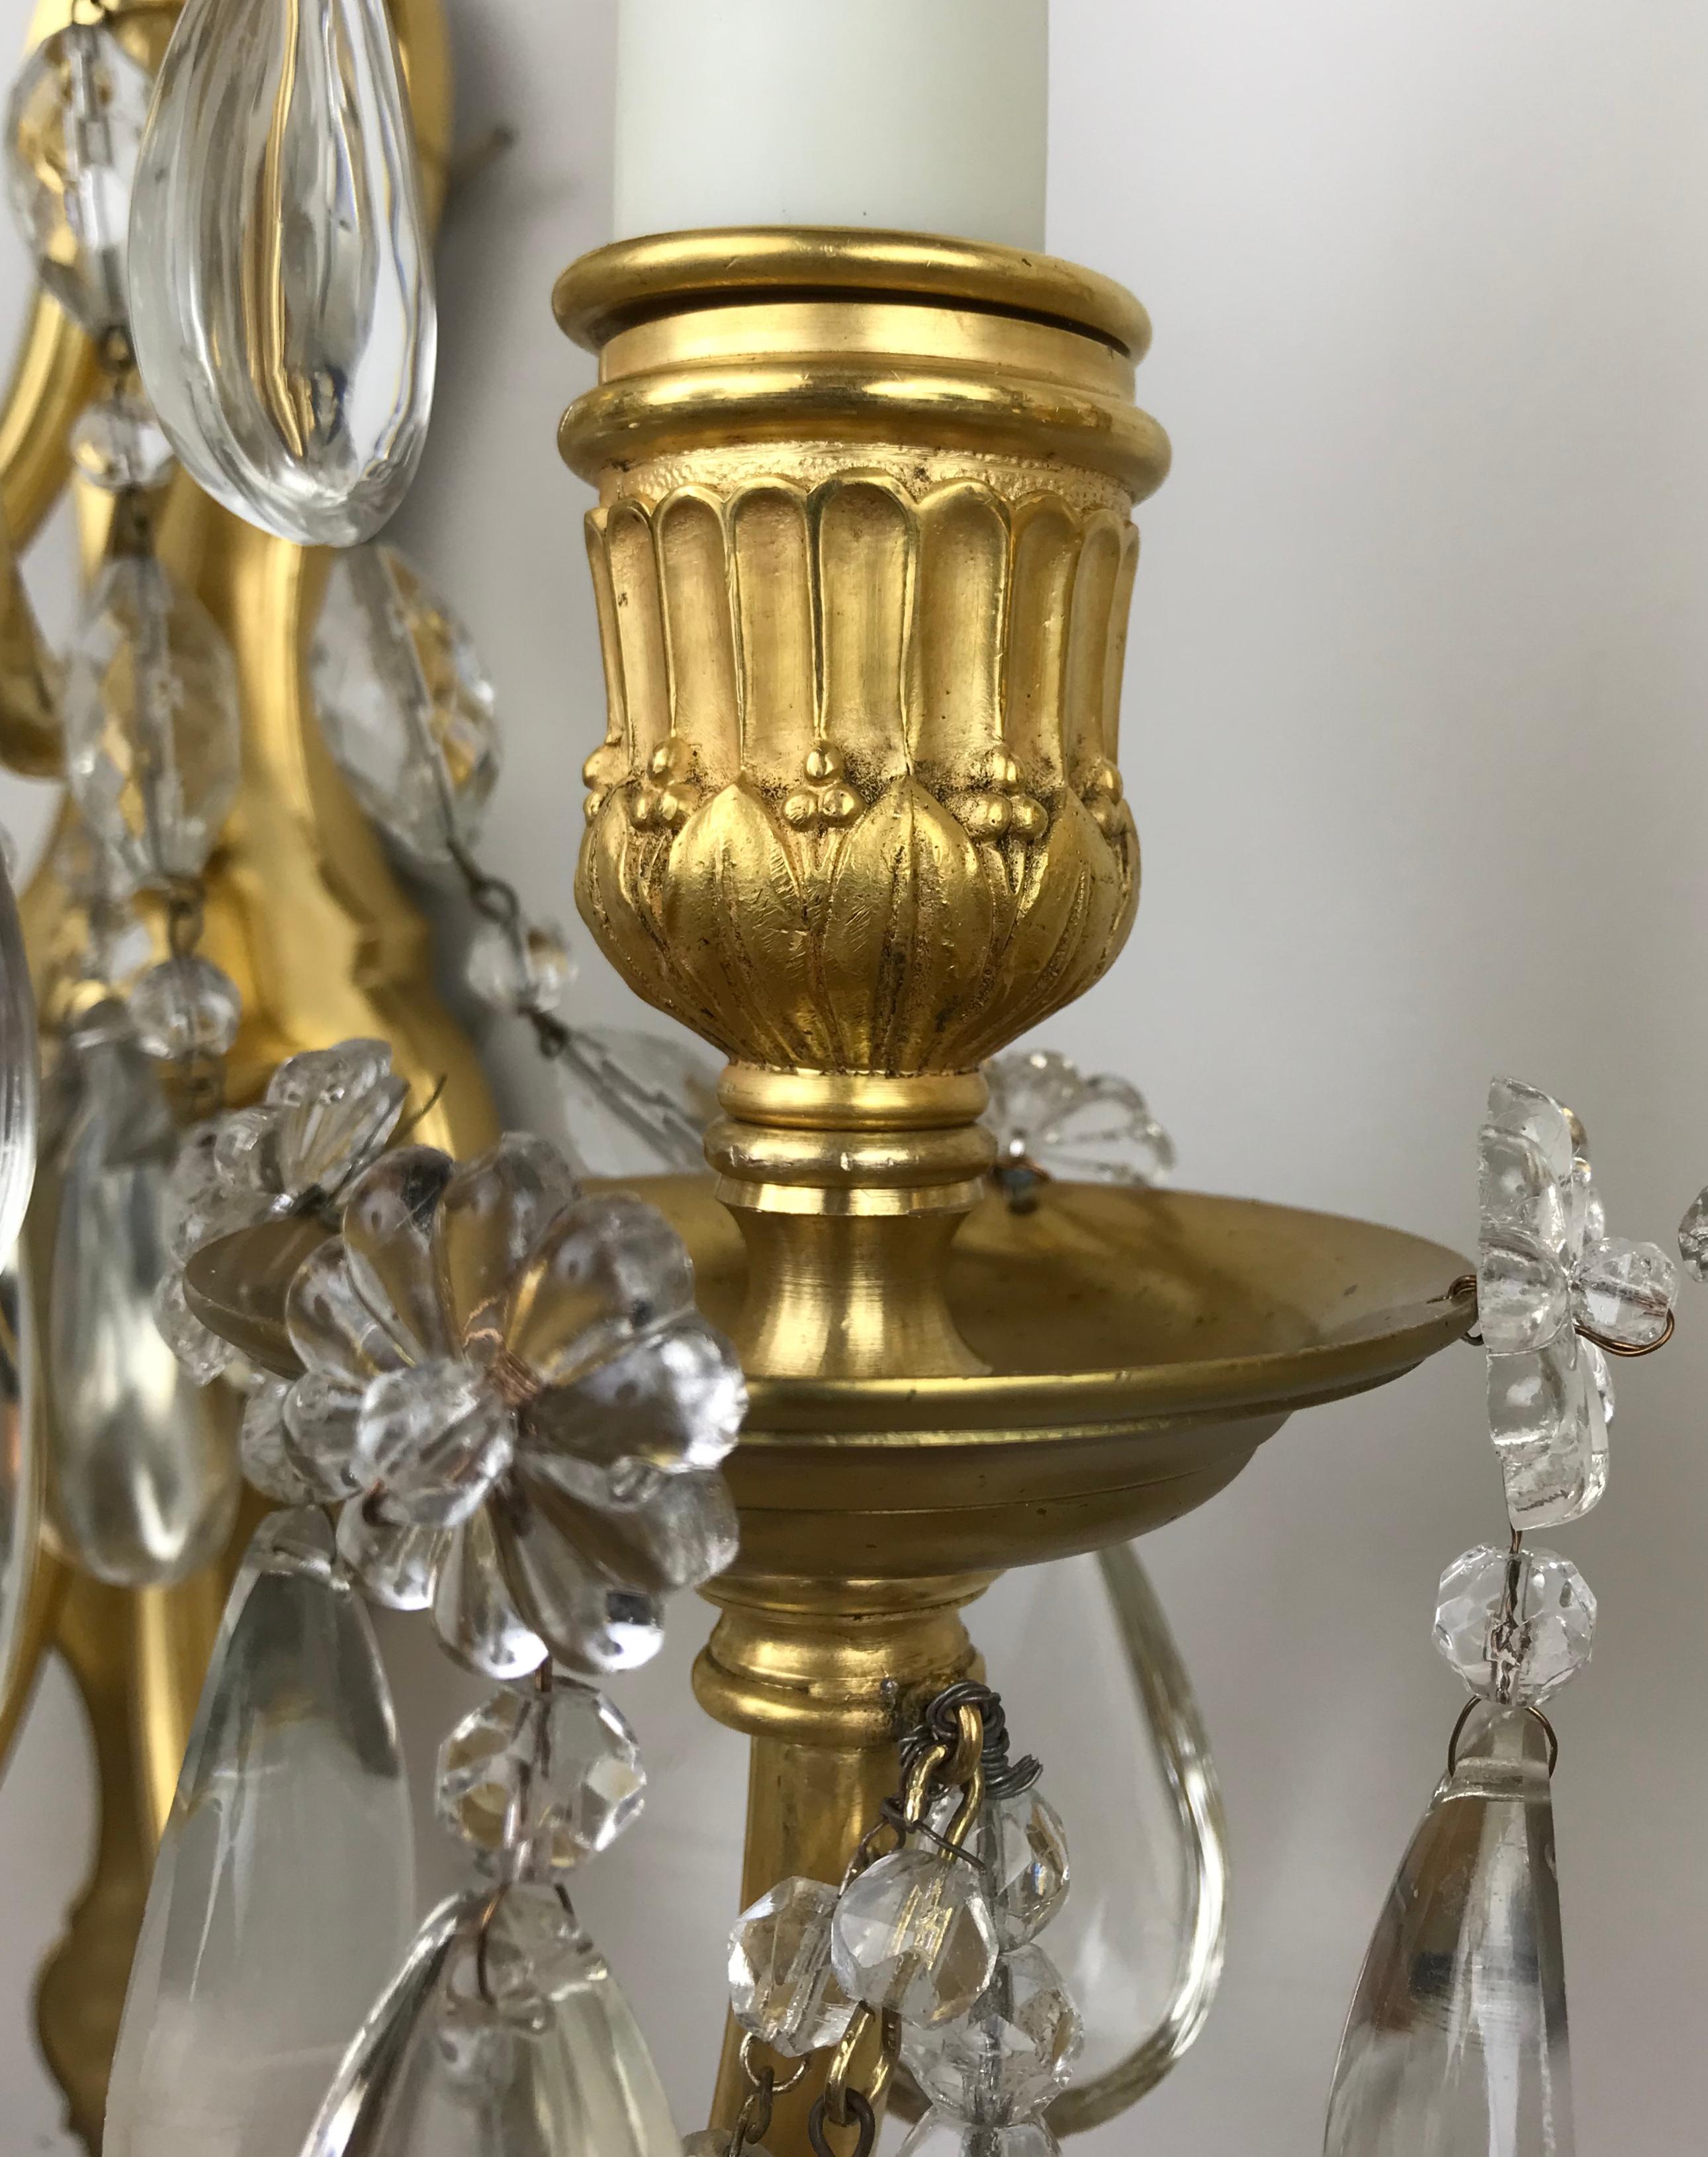 This impressive pair of Louis XVI style bronze sconces by the famed maker Edward F. C Caldwell feature cast and hand chased gilt bronze candle cups with Classical motifs, cabochon form crystal drops, and cut crystal obelisk form finials. They are